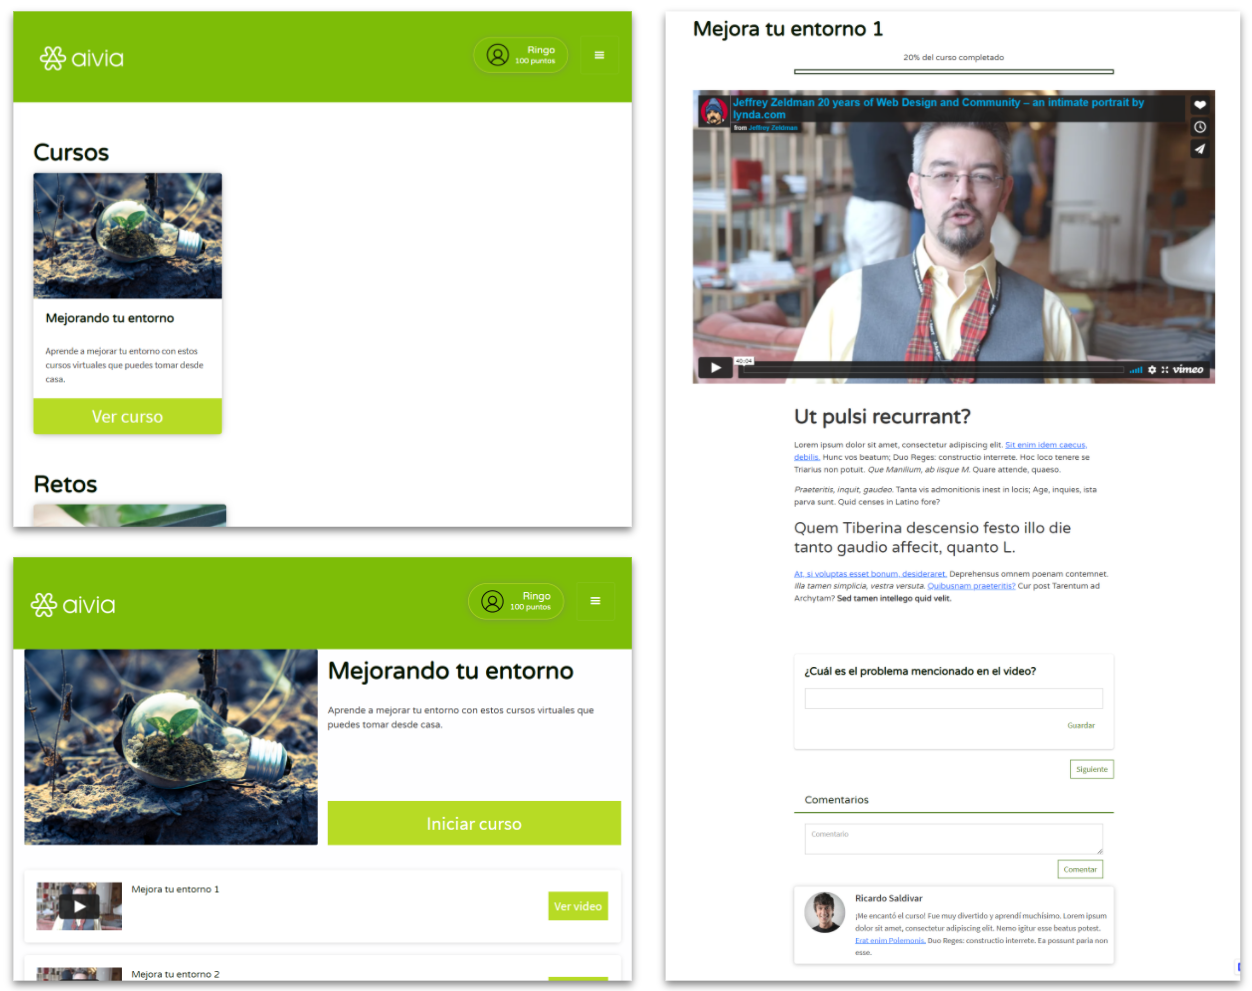 Prototype design of the main pages of the application: "Catalogue page," "course visualization," and "lesson taking." In the image, you can see a video player, a questionnaire, and a comment section